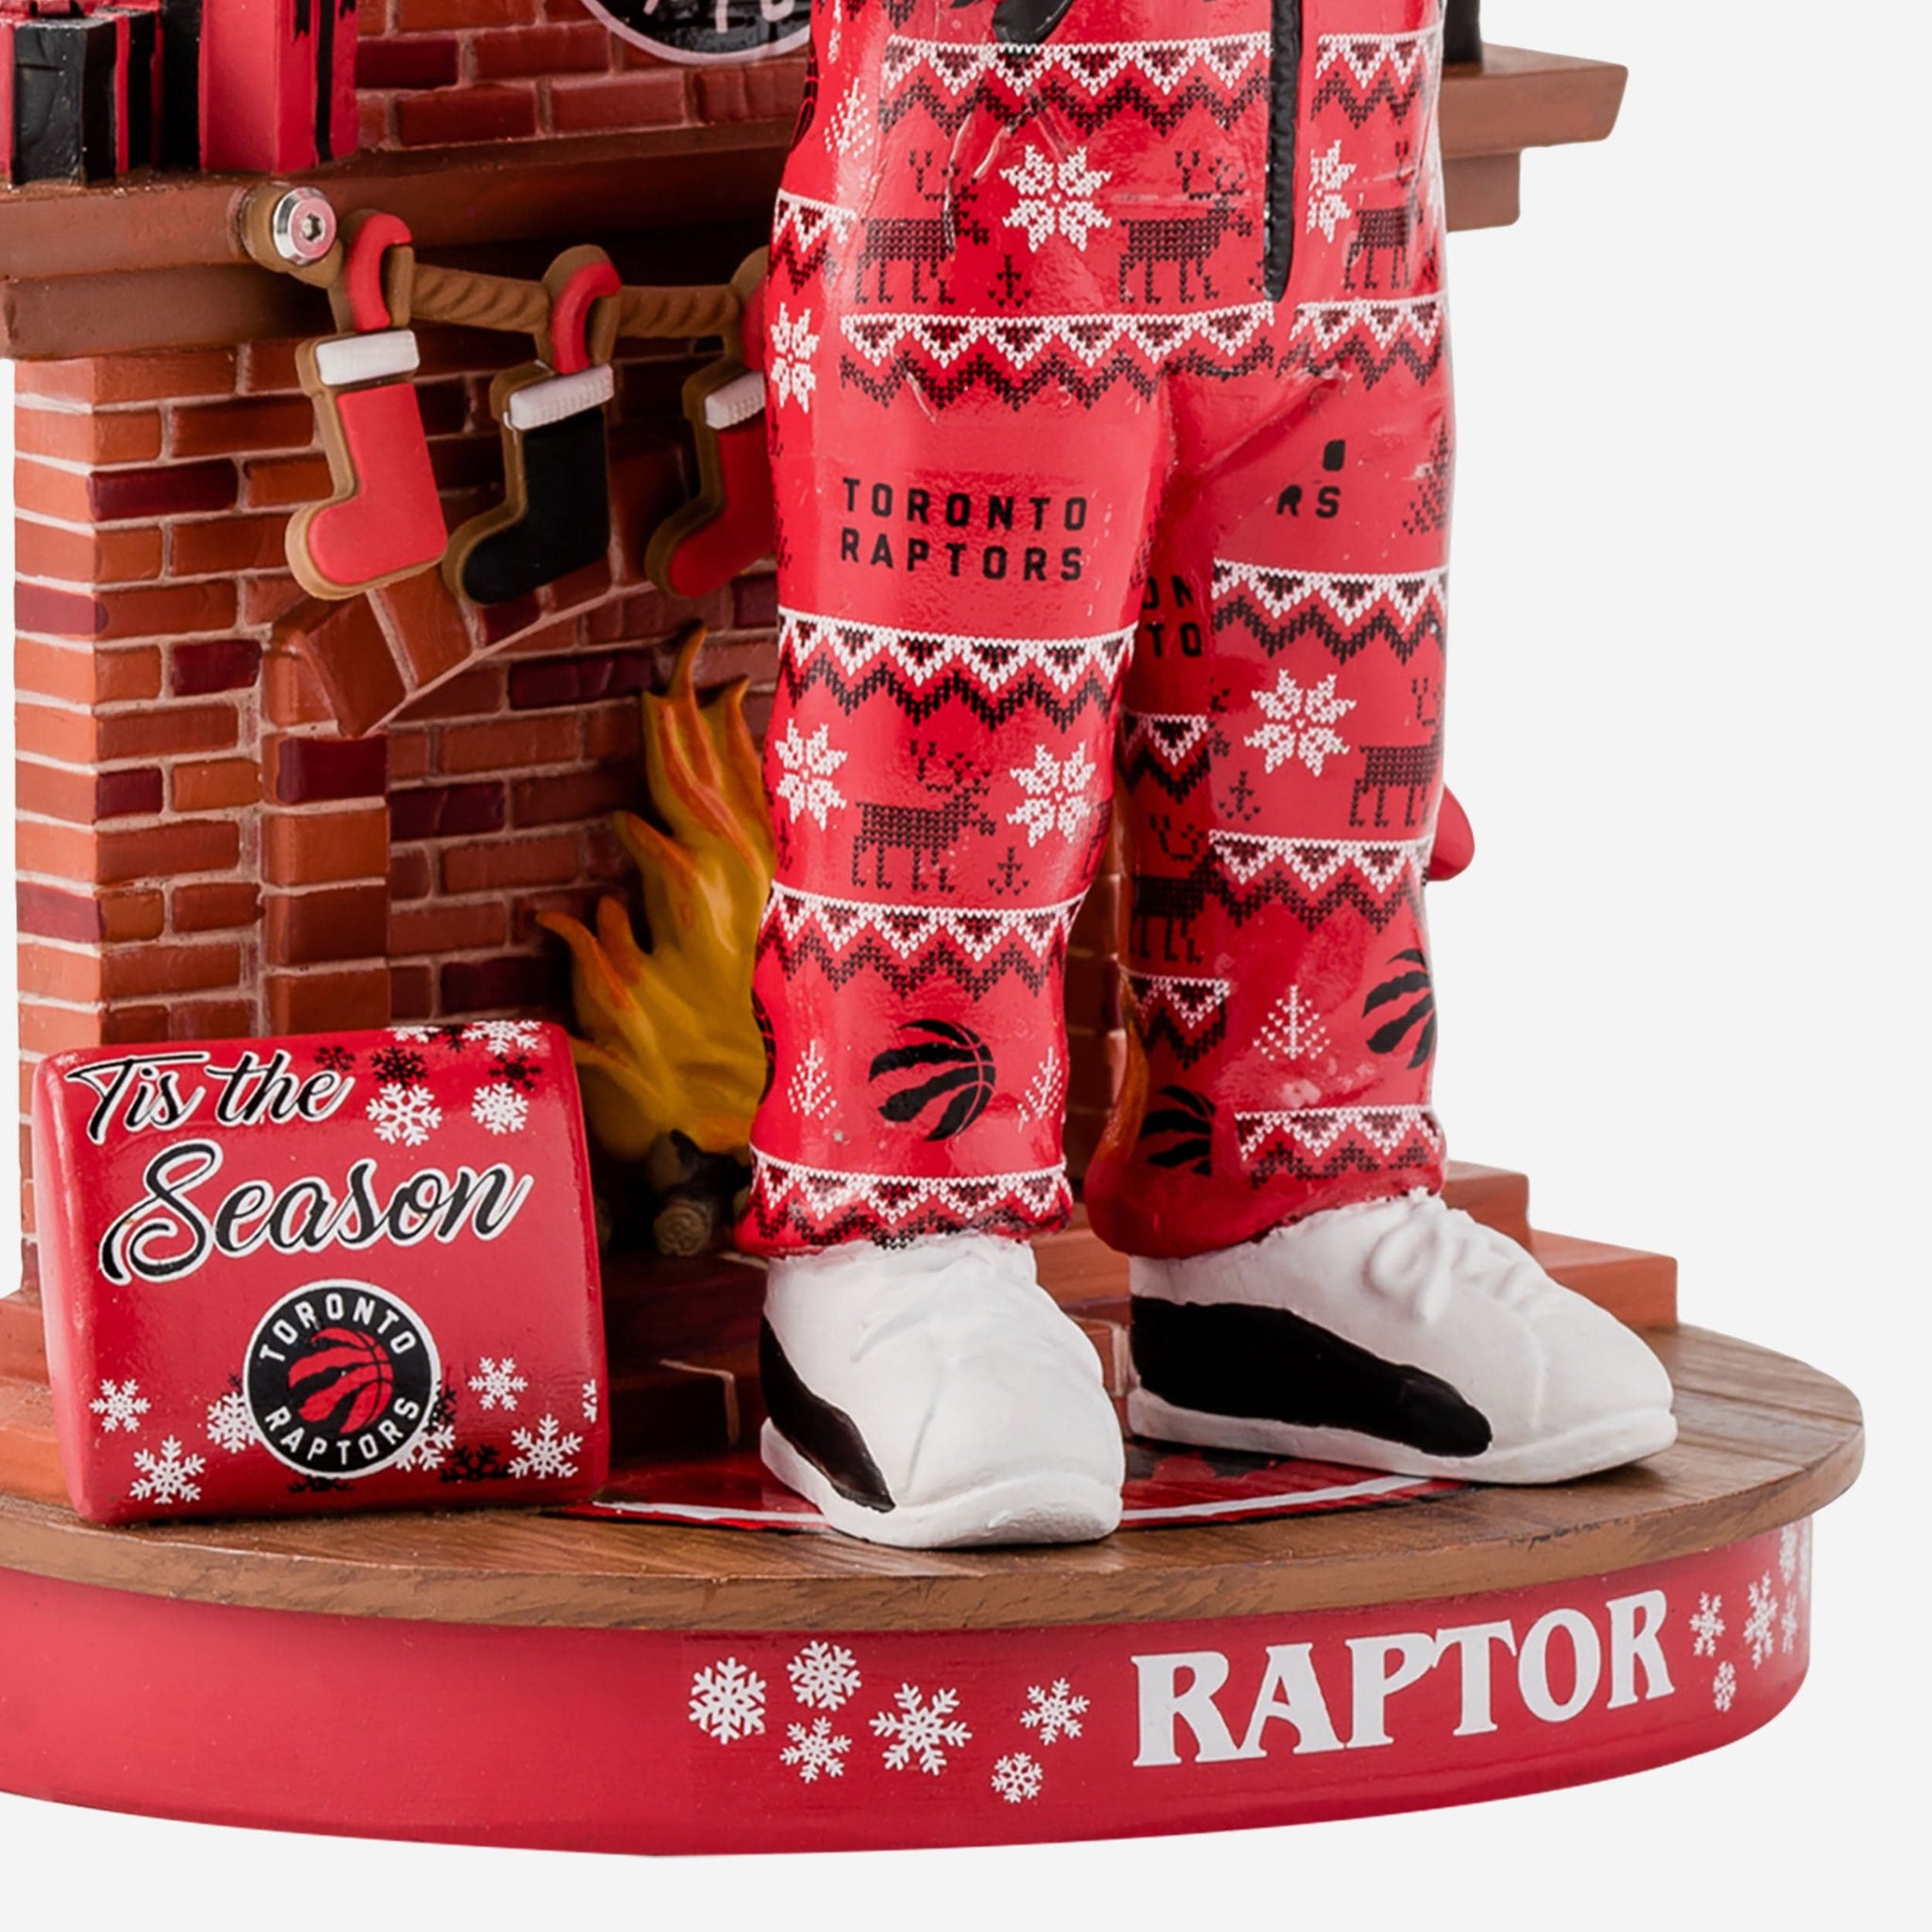 The Raptor Toronto Raptors Thanksgiving Mascot Bobblehead Officially Licensed by NBA